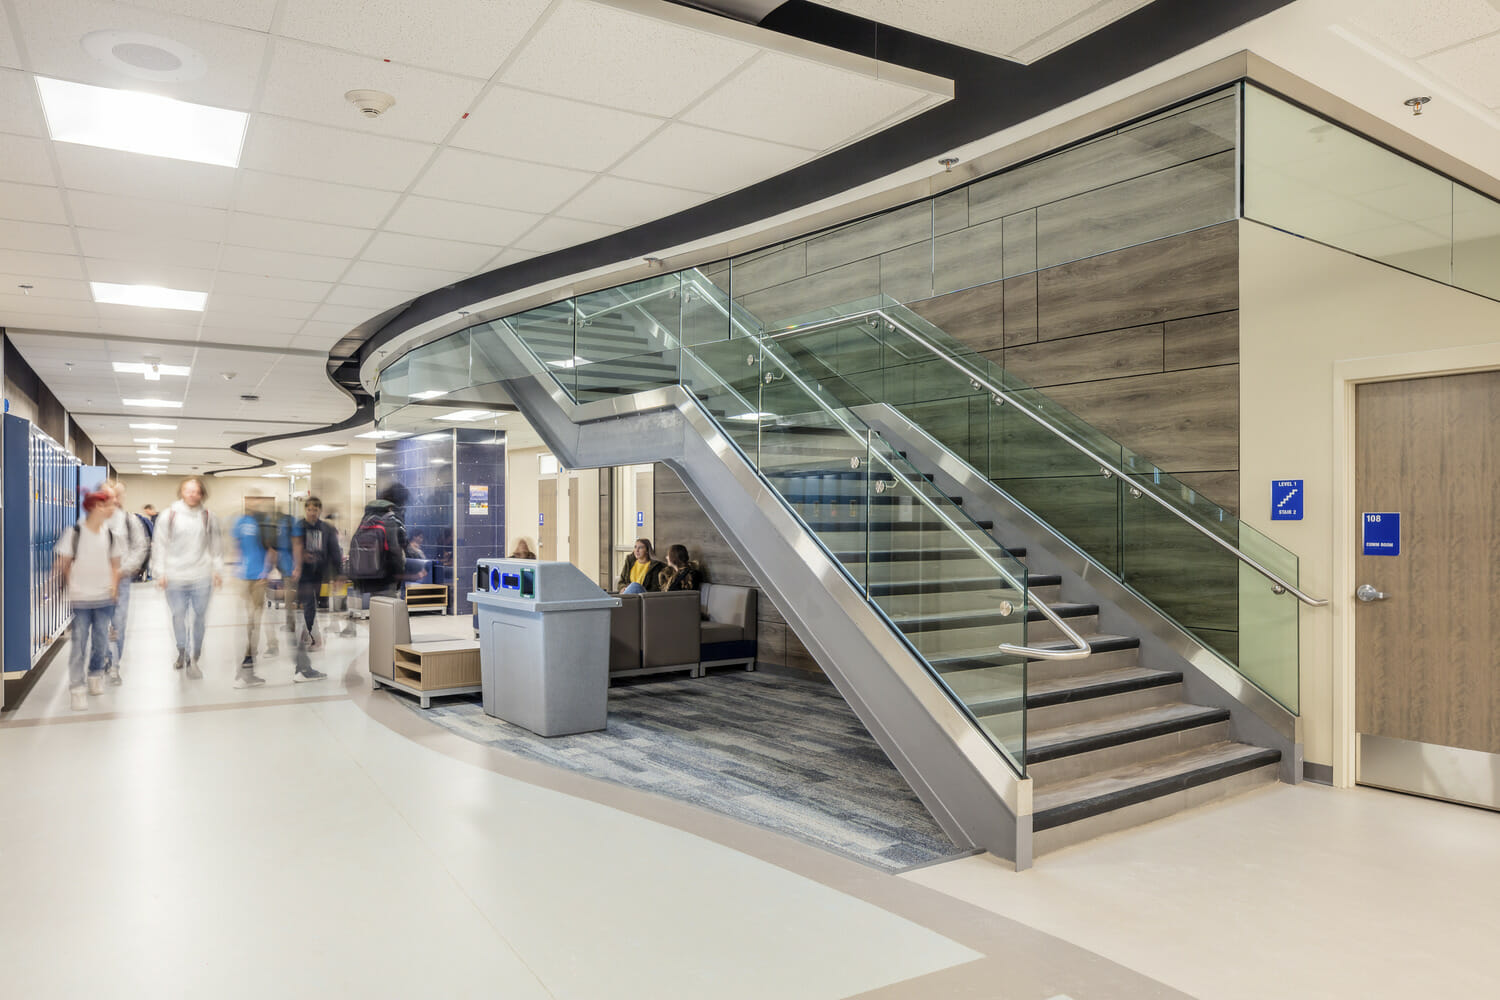 The lobby of EXP Hospital with a glass staircase.